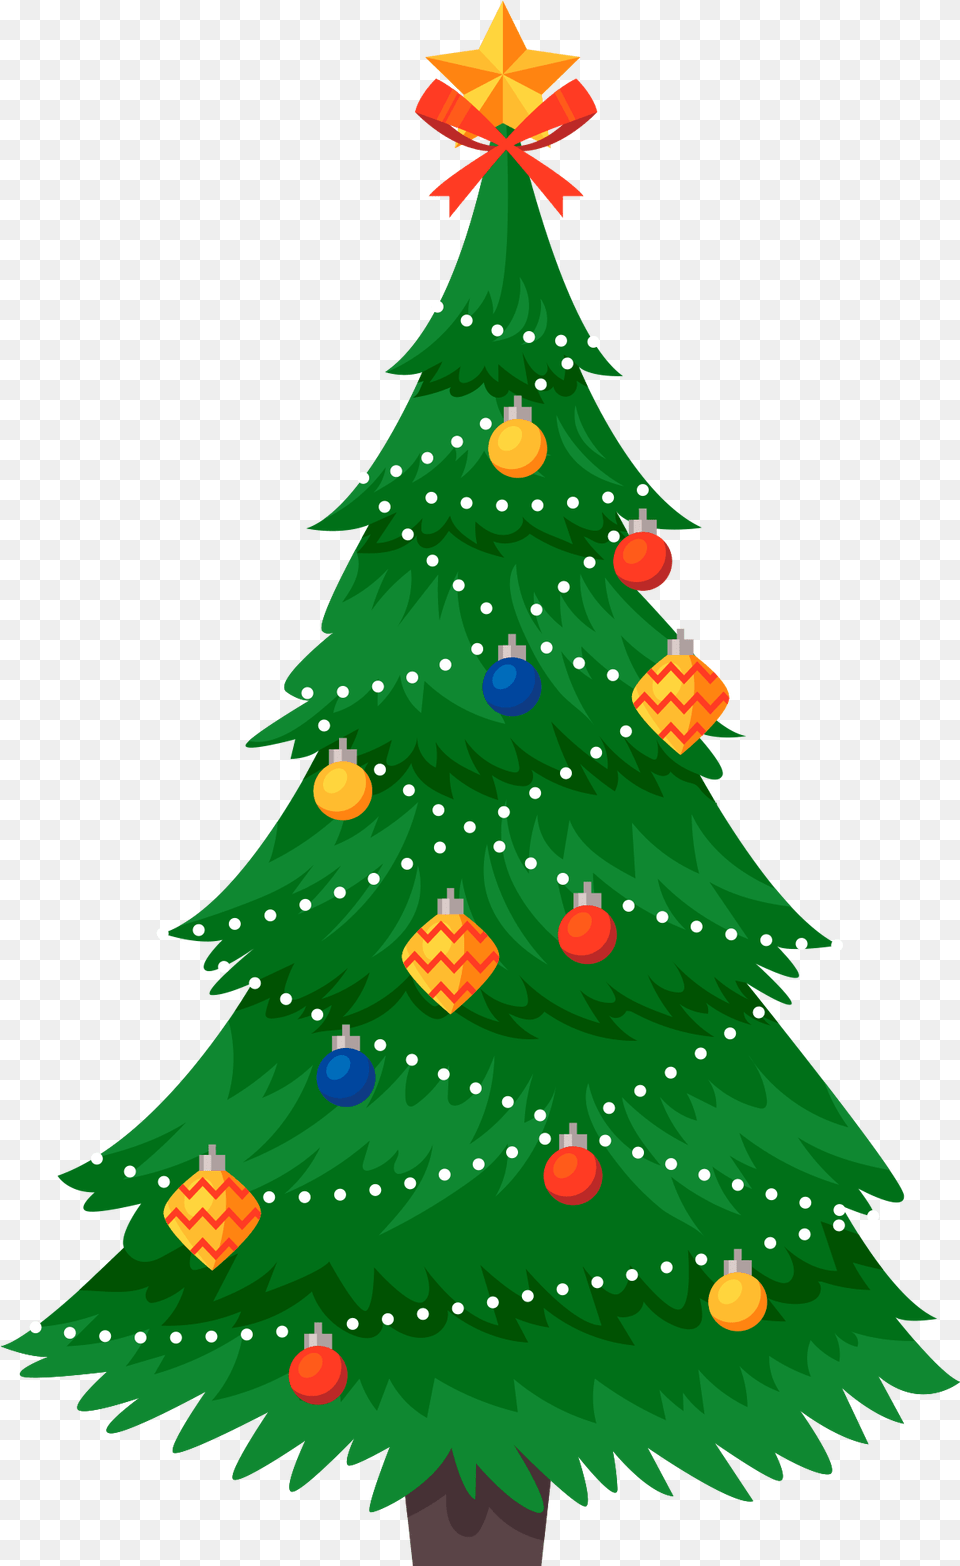 Cute Christmas Tree Clipart Hd Download Christmas Photos Clipart, Plant, Christmas Decorations, Festival, Christmas Tree Png